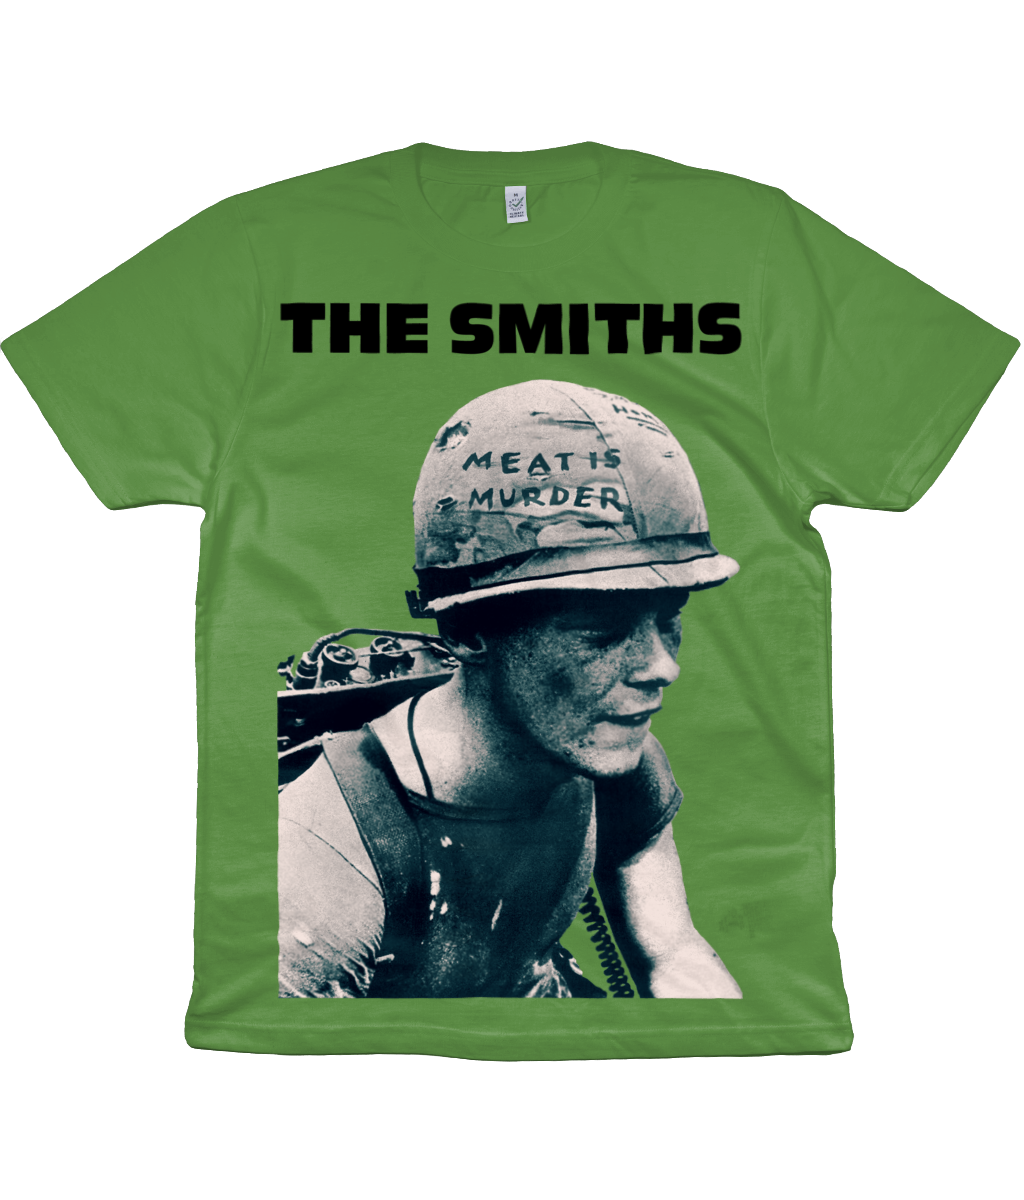 THE SMITHS - MEAT IS MURDER